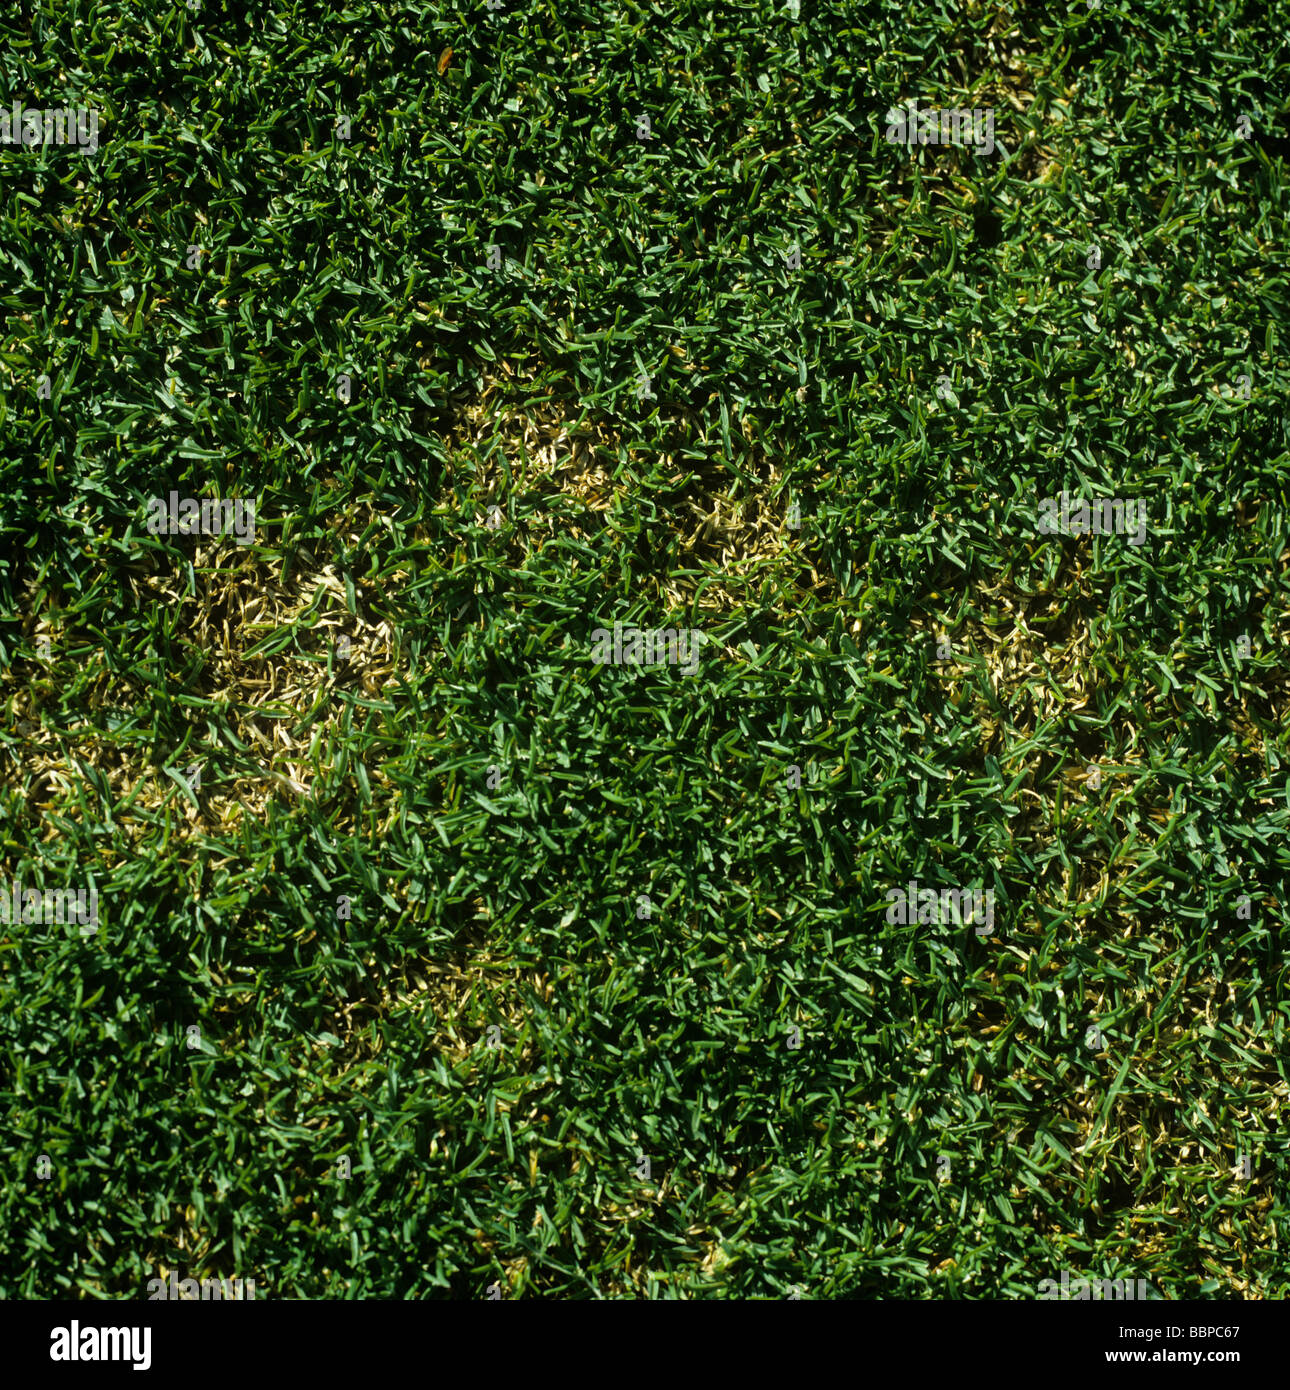 Snow mould Monographella nivalis patch in golf course green turf Stock Photo